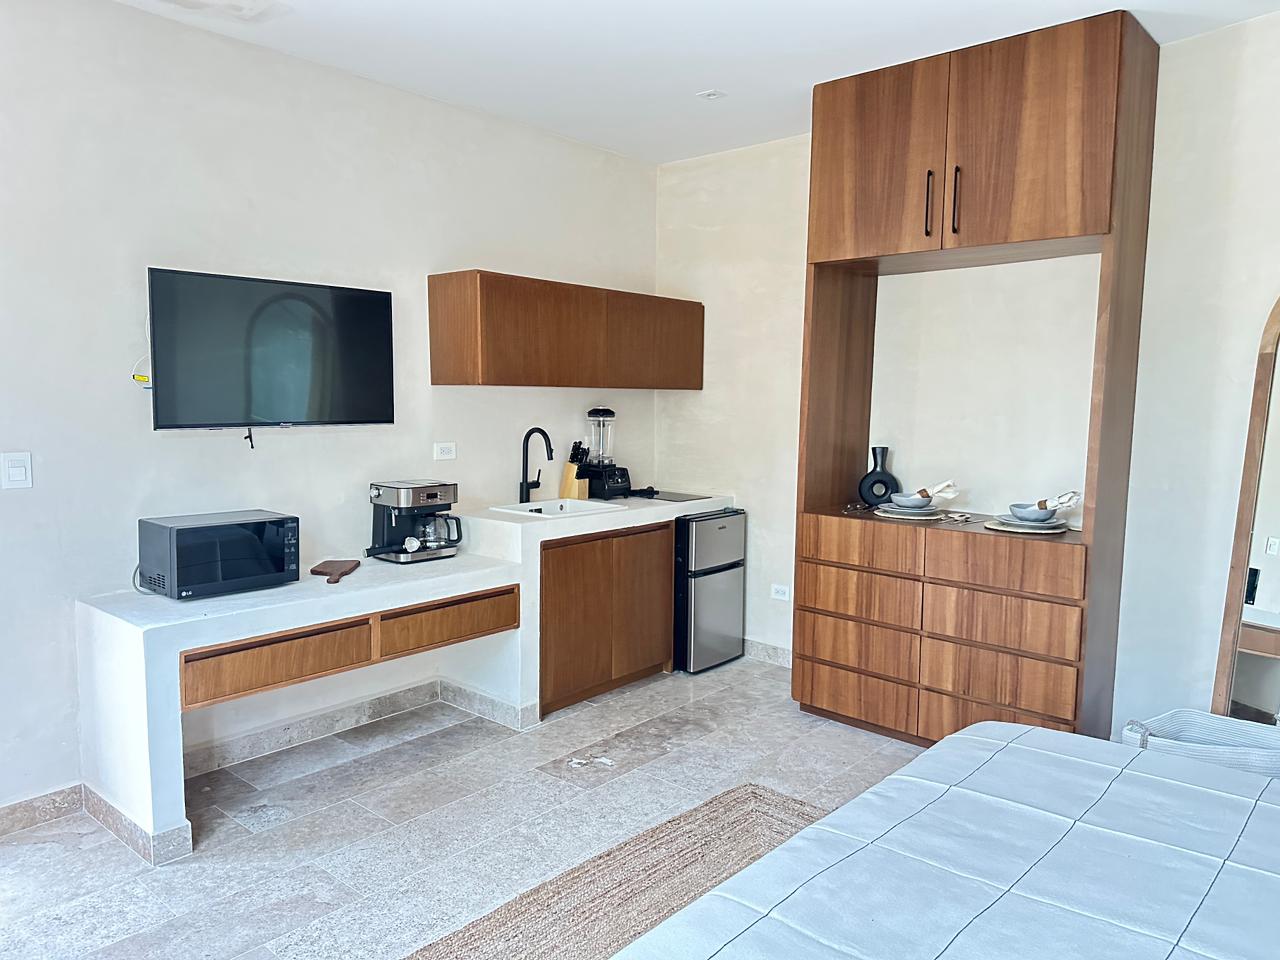 exclusive residences for sale in tulum the enclave lockoff suite kitchenette